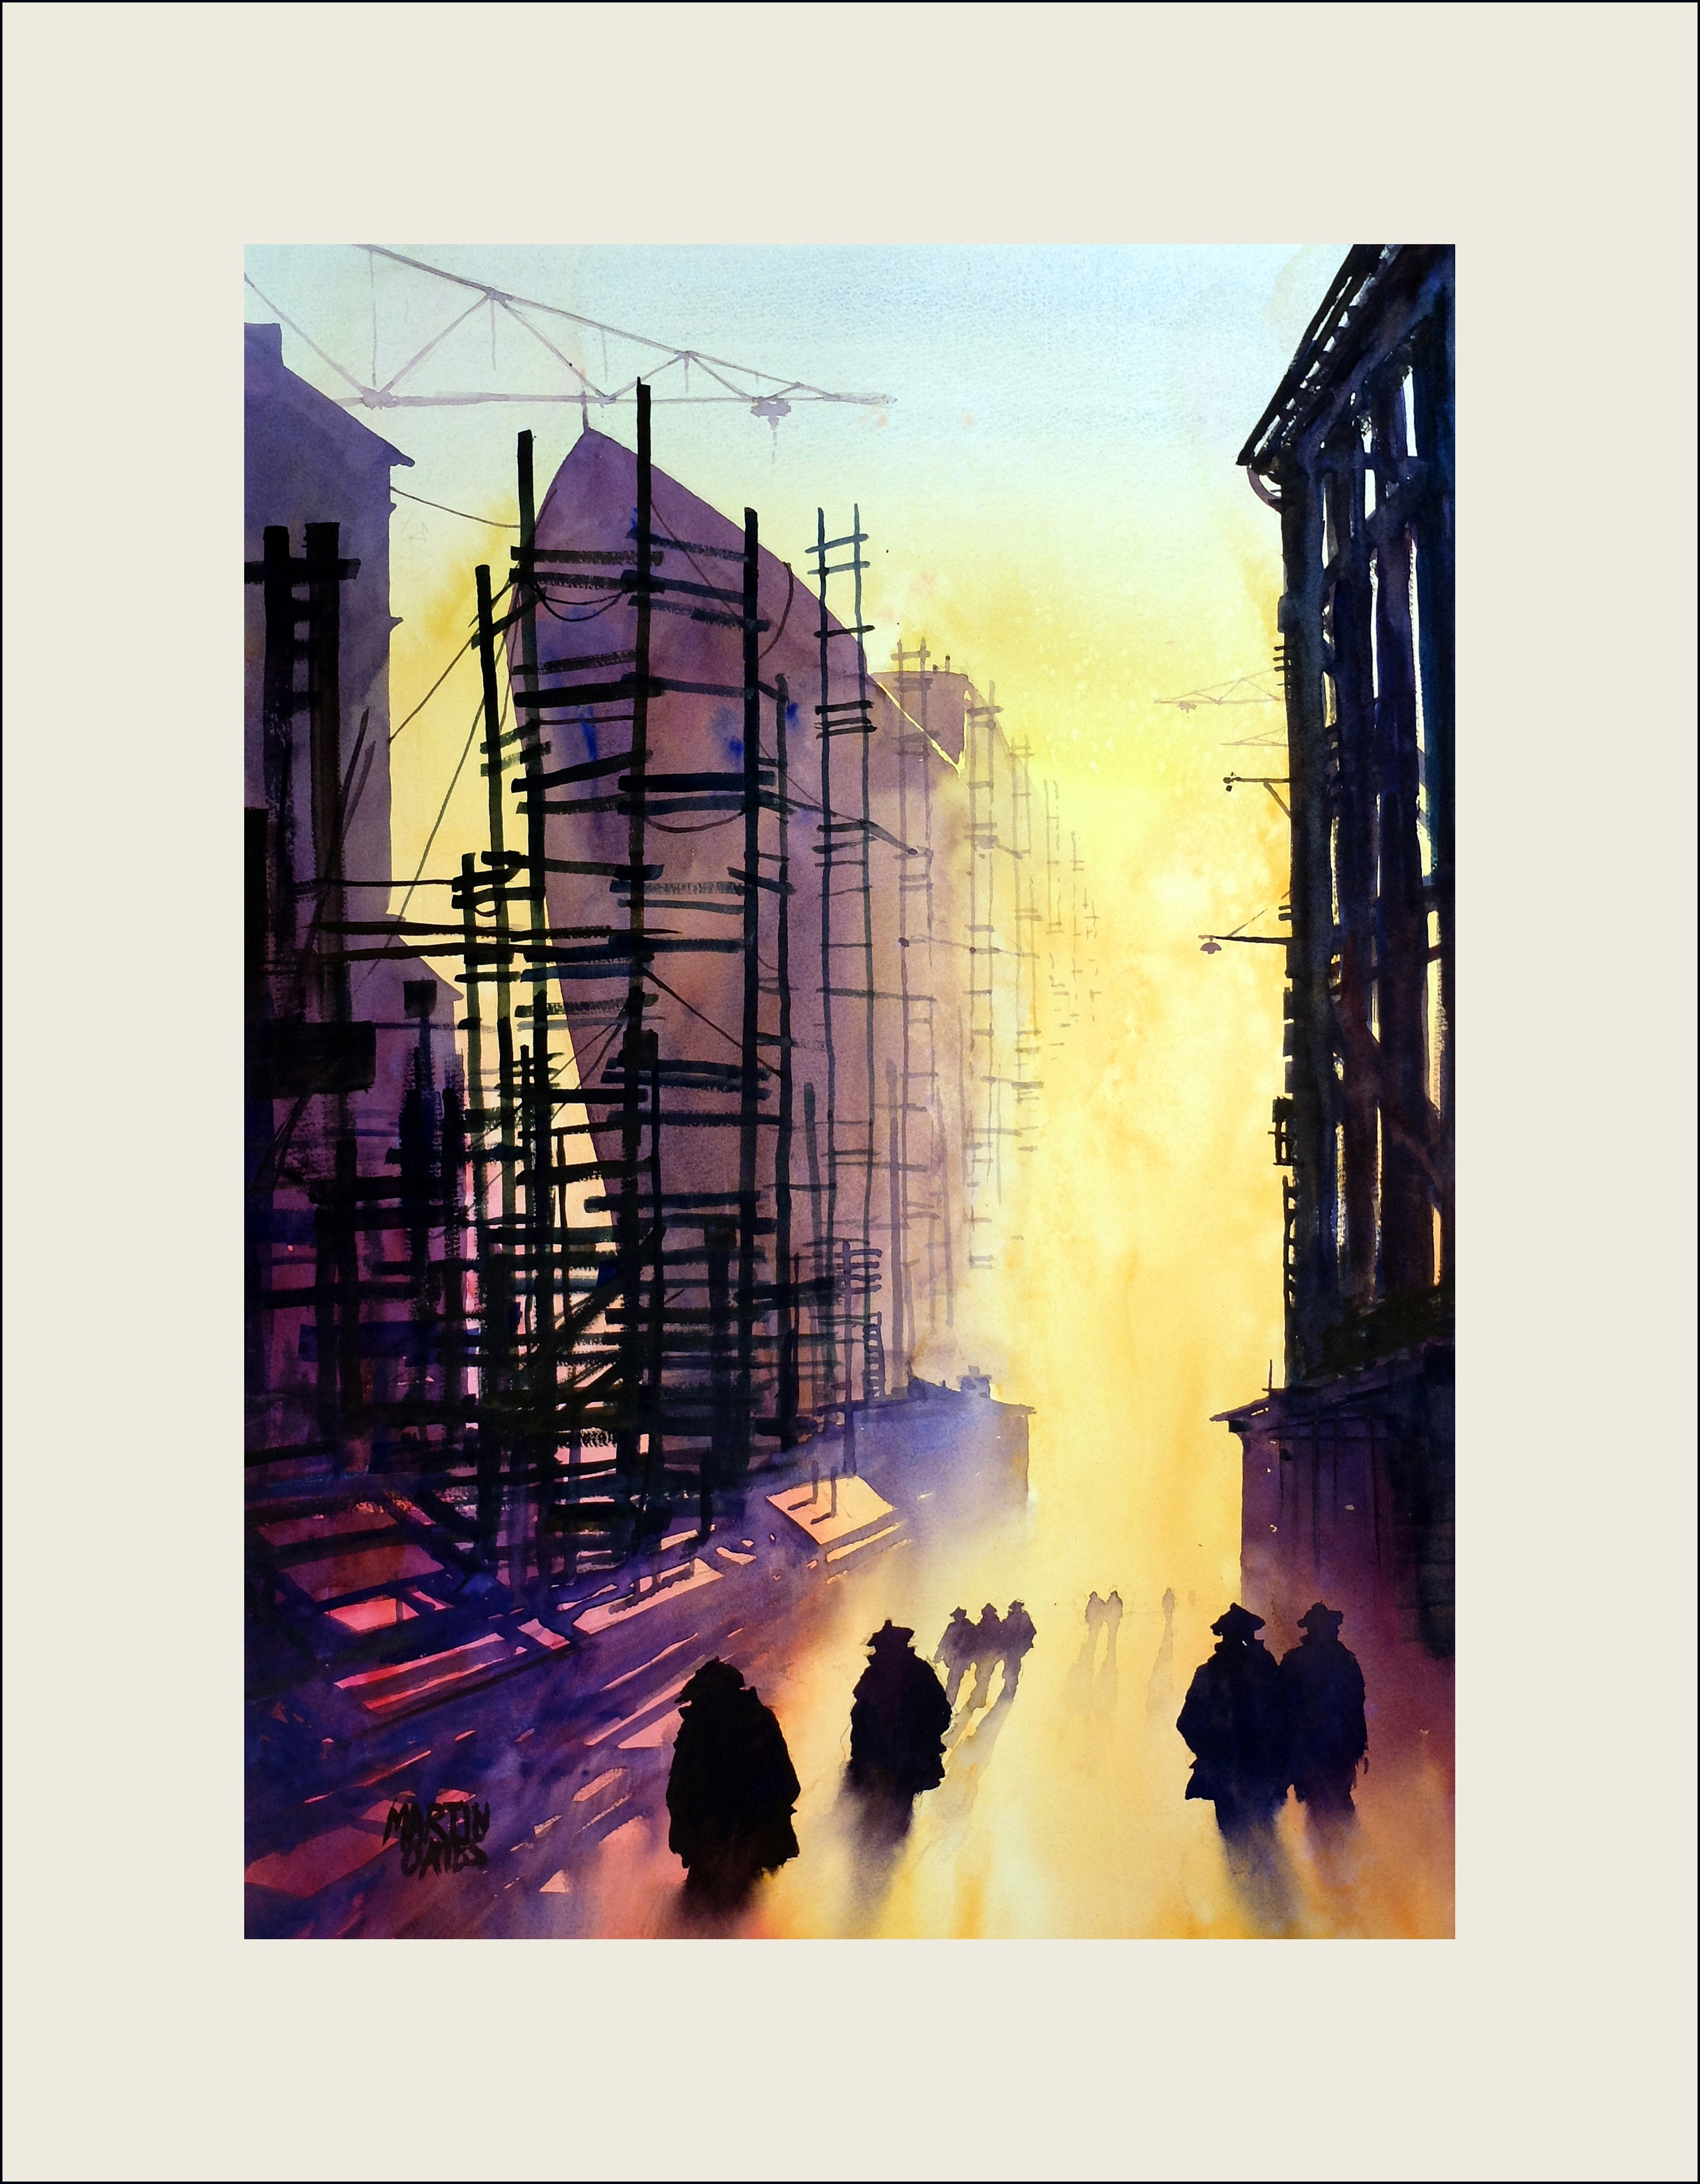 Clyde Ghosts # 1. Original watercolour by Martin Oates 50x70cms